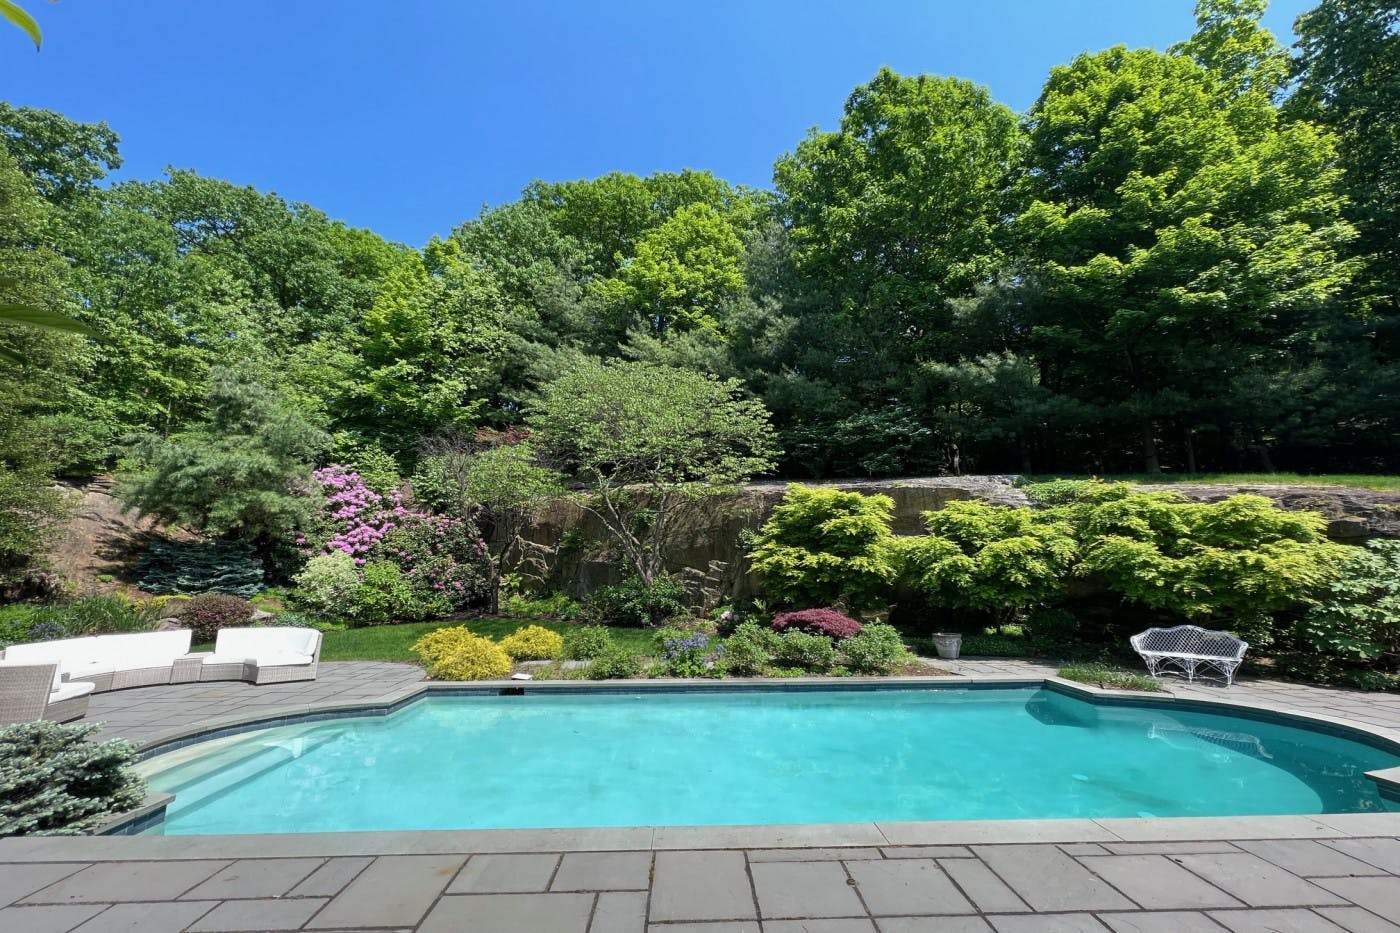 Secluded Pool & Garden on the Hudson